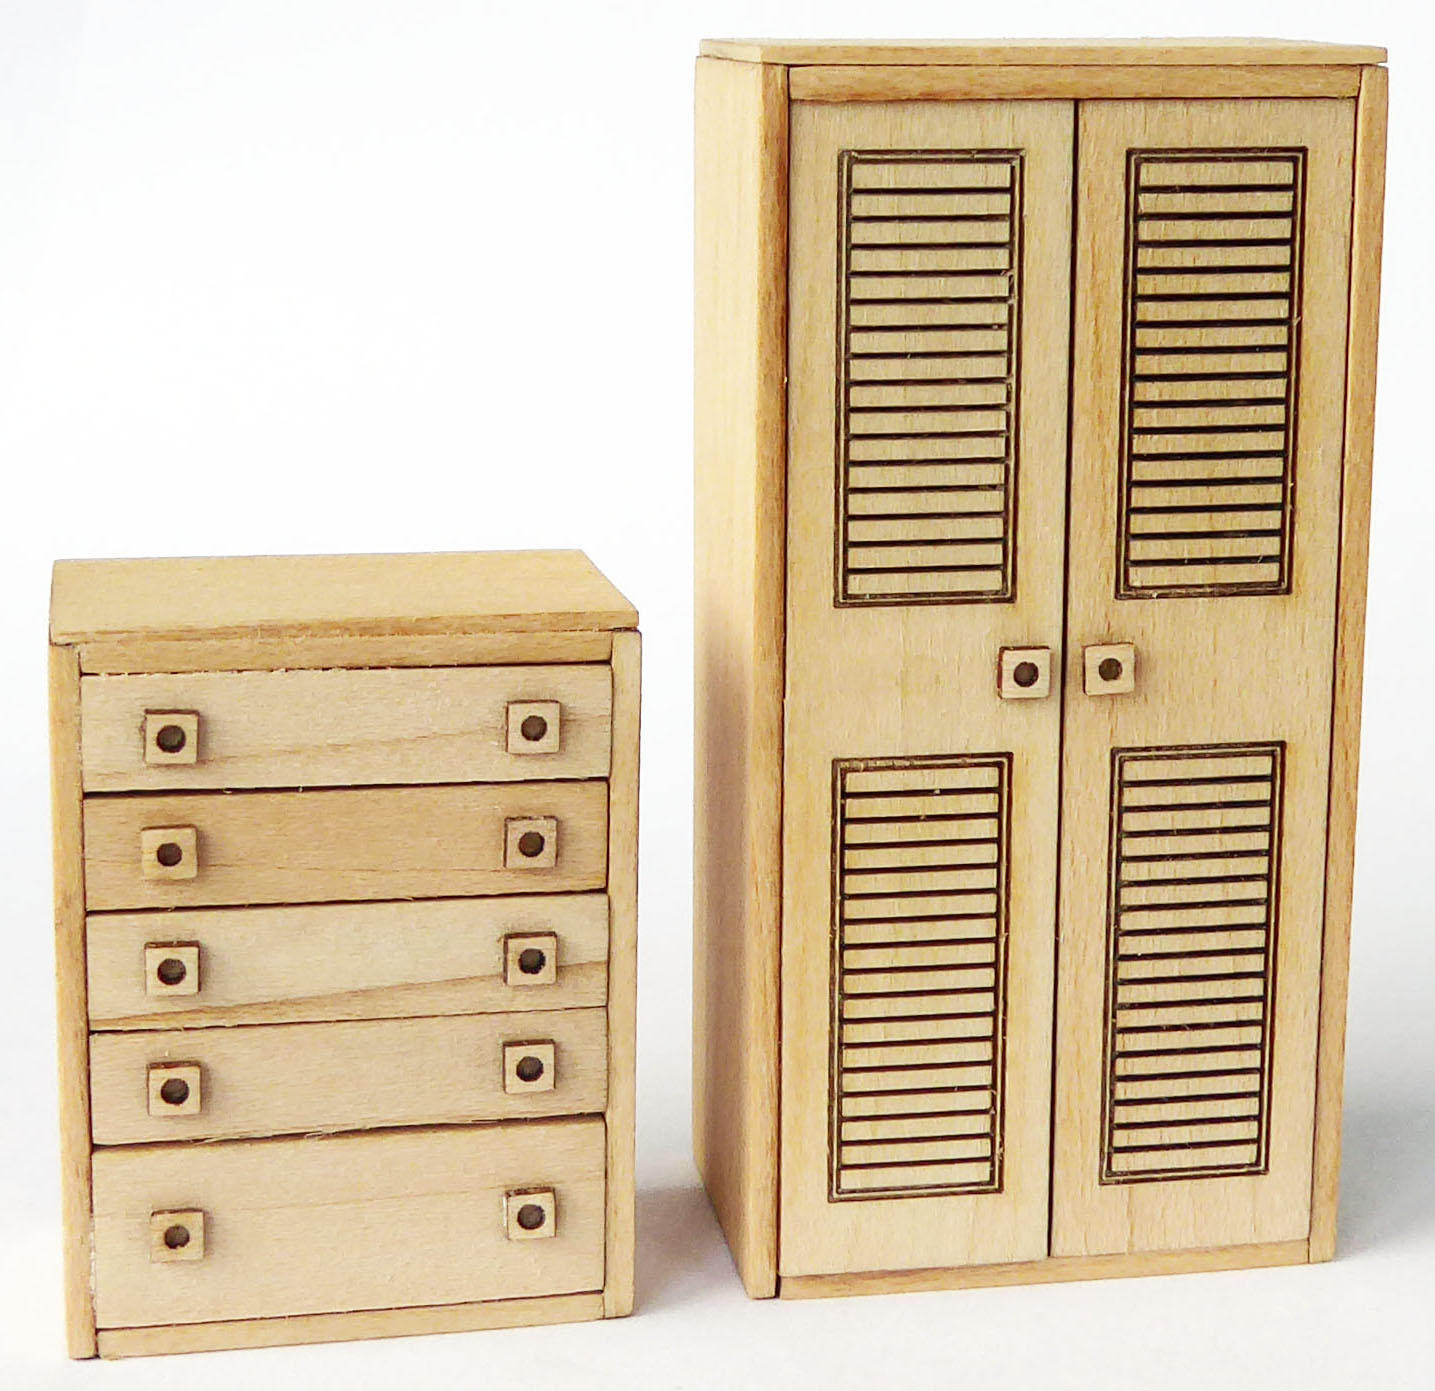 1/24th scale 70s Retro Wardrobe and Drawers Kit